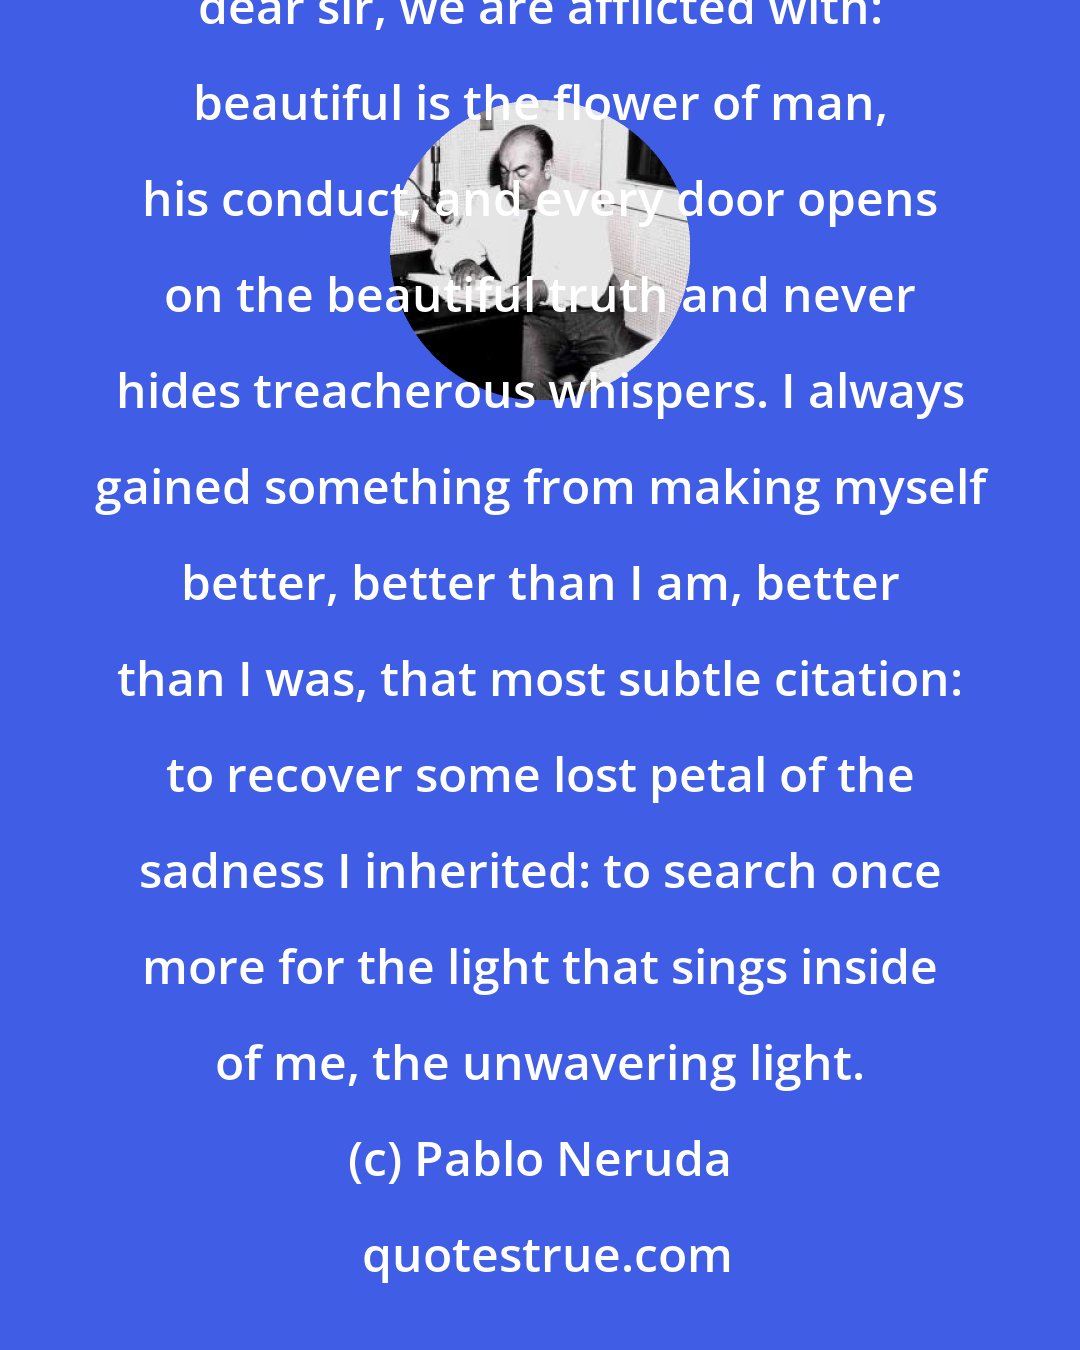 Pablo Neruda: Never an illness, nor the absence of grandeur, no, nothing is able to kill the best in us, that kindness, dear sir, we are afflicted with: beautiful is the flower of man, his conduct, and every door opens on the beautiful truth and never hides treacherous whispers. I always gained something from making myself better, better than I am, better than I was, that most subtle citation: to recover some lost petal of the sadness I inherited: to search once more for the light that sings inside of me, the unwavering light.